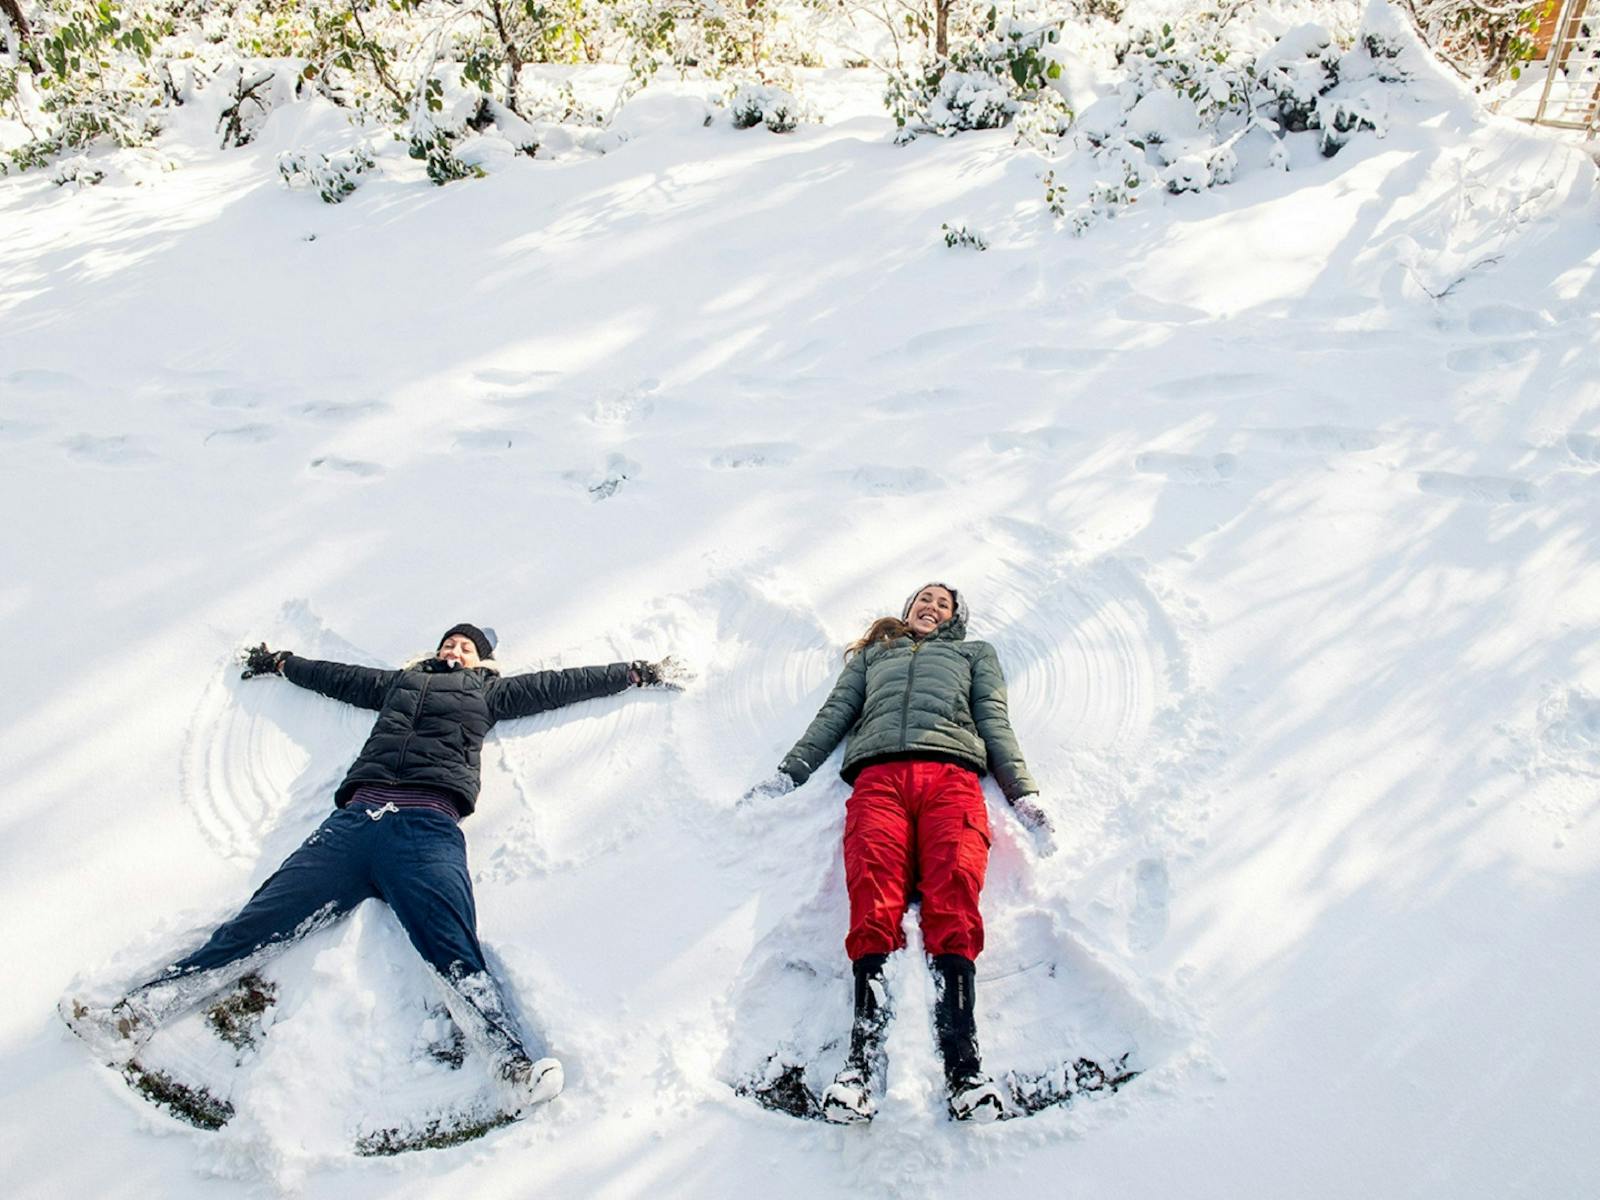 Two women smiling and making snow angels